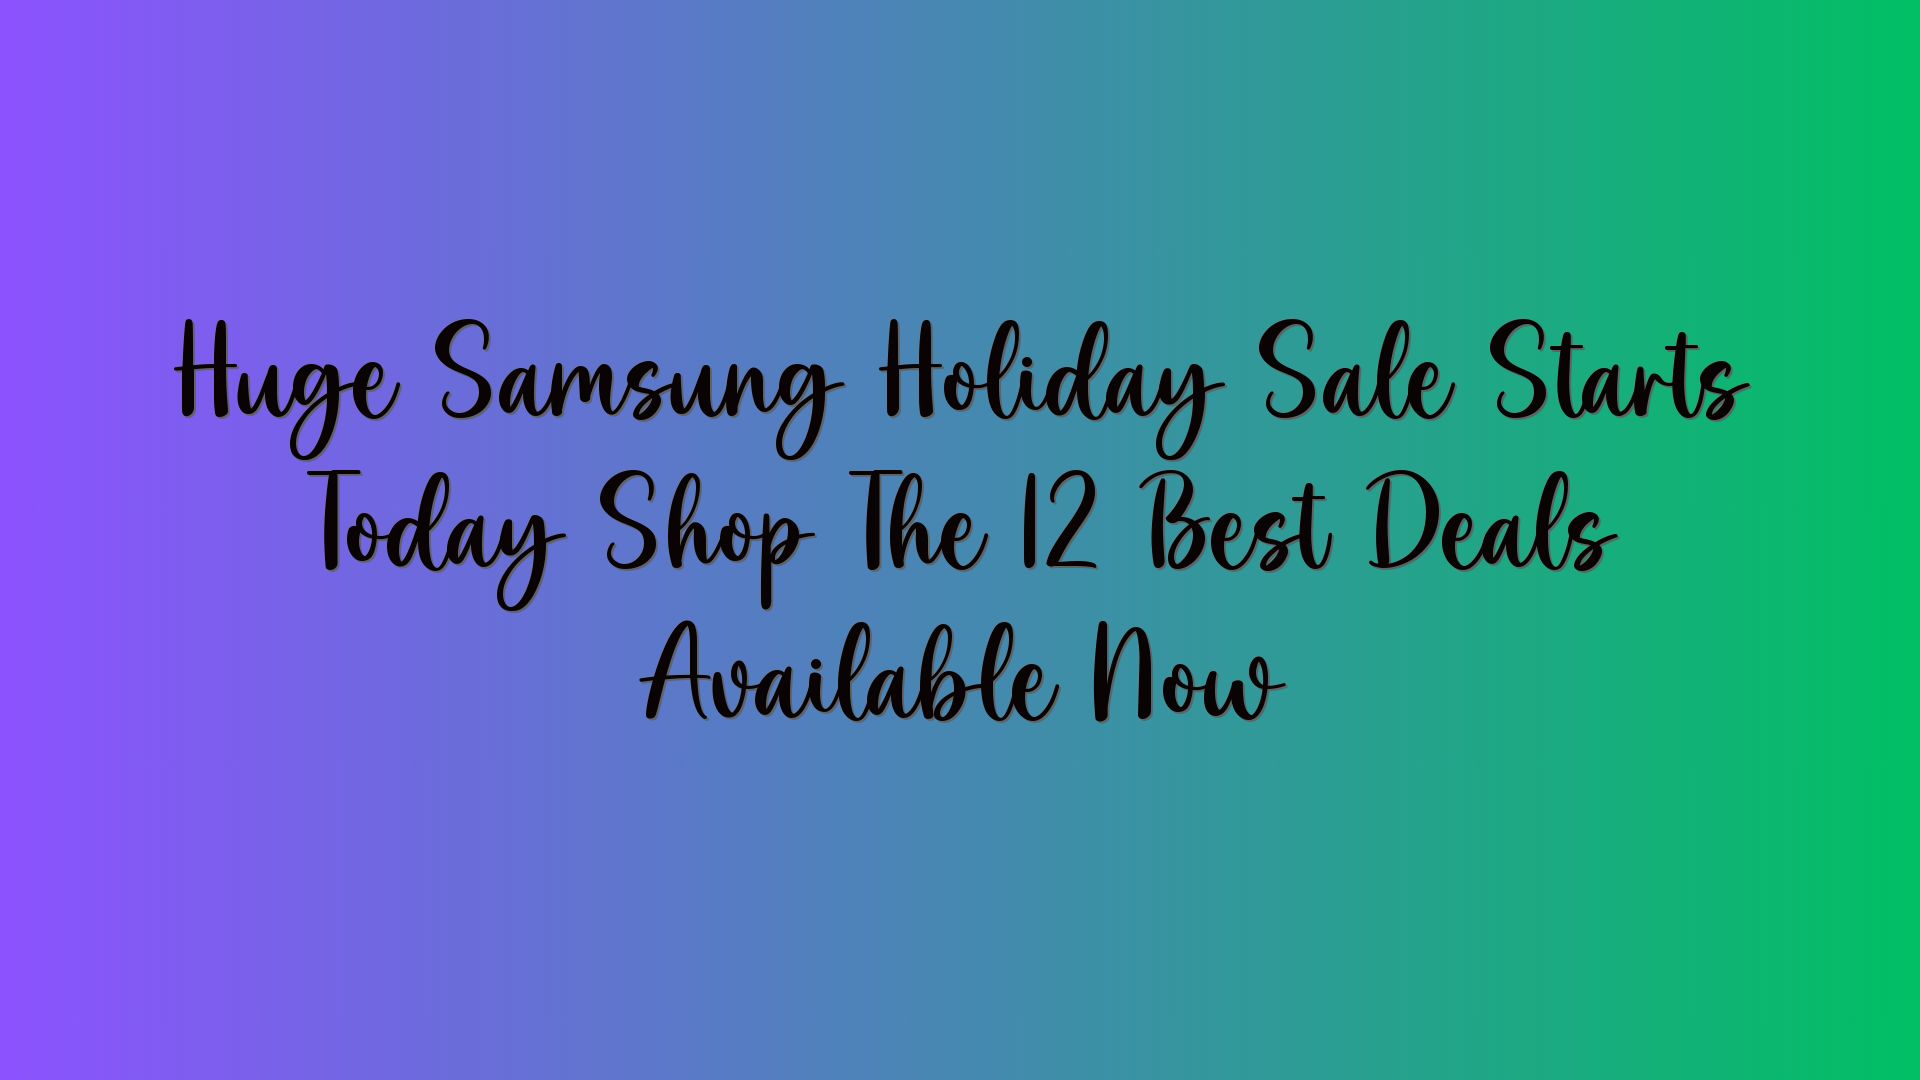 Huge Samsung Holiday Sale Starts Today Shop The 12 Best Deals Available Now